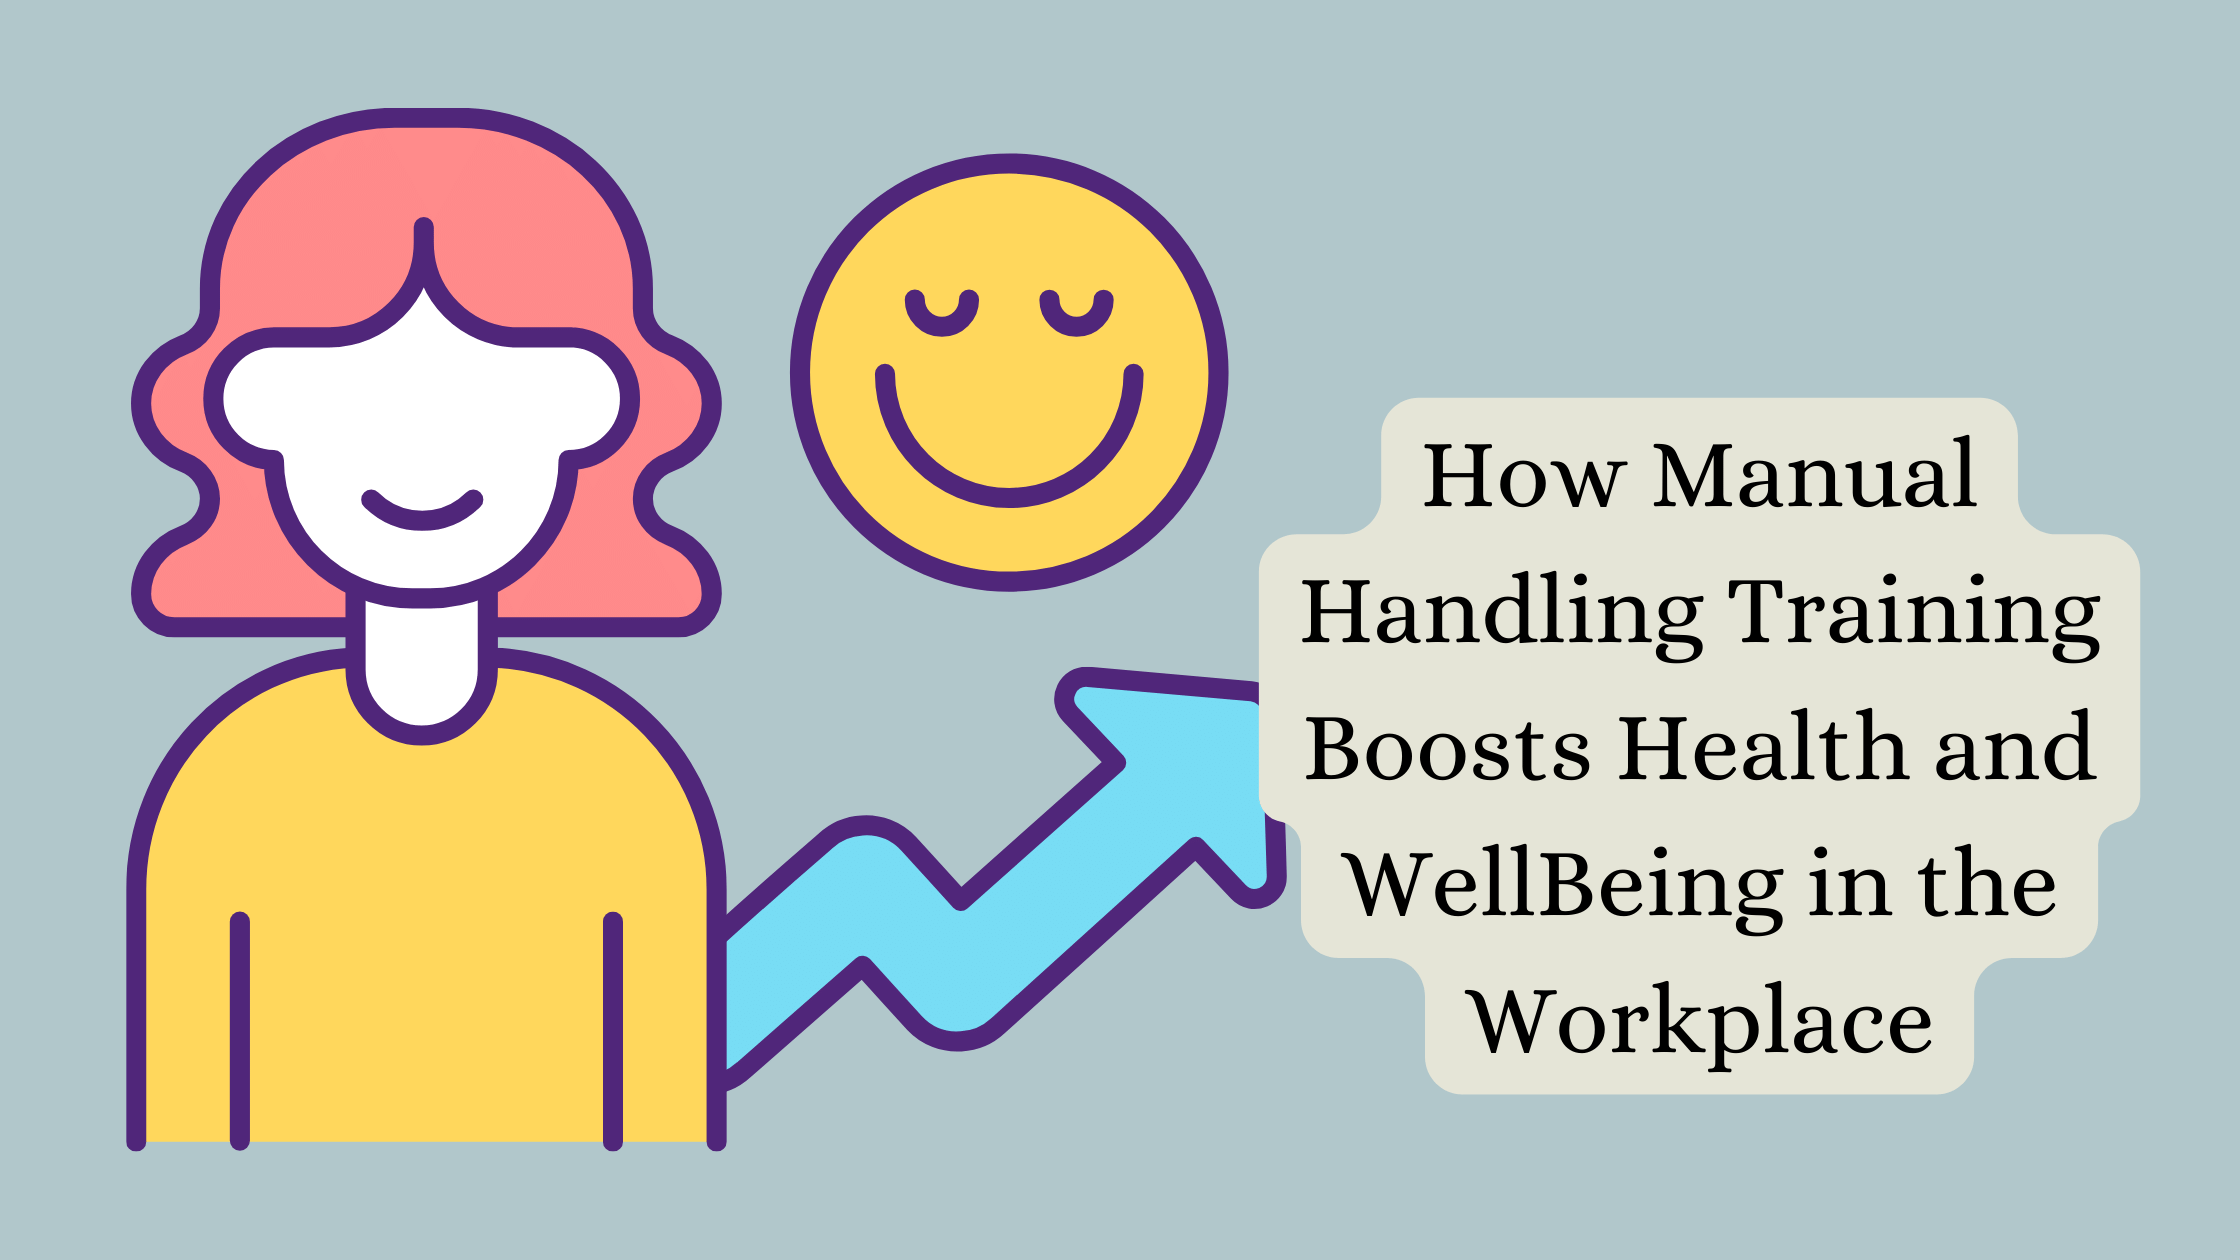 Manual Handling Training Boosts Health and WellBeing in the Workplace